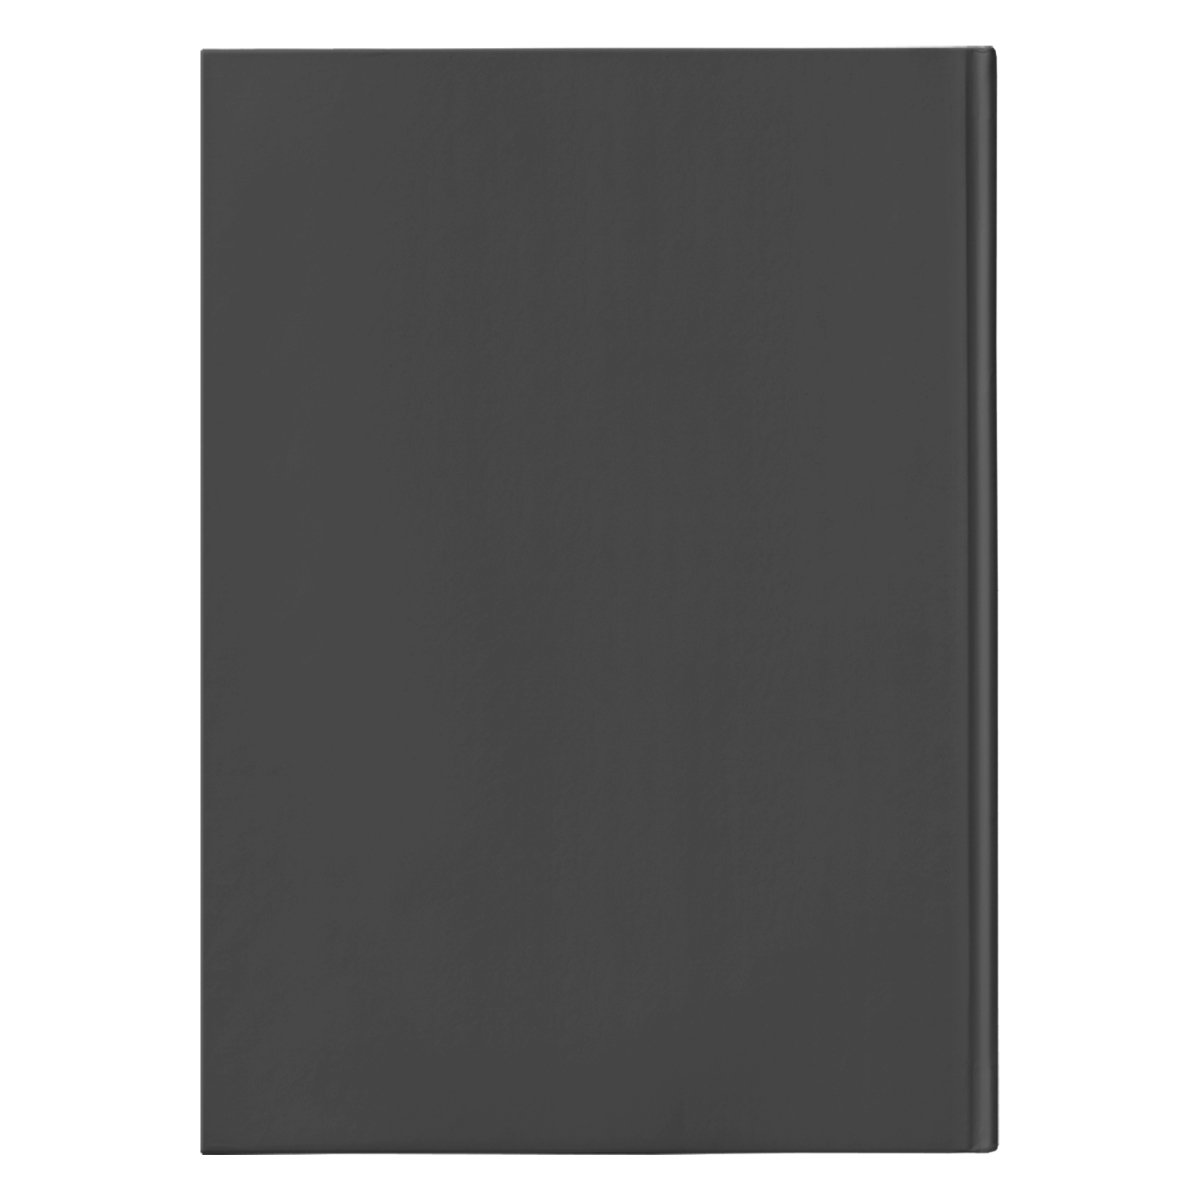 Reformed Anglican (150 Page Hardcover Journal) - SDG Clothing